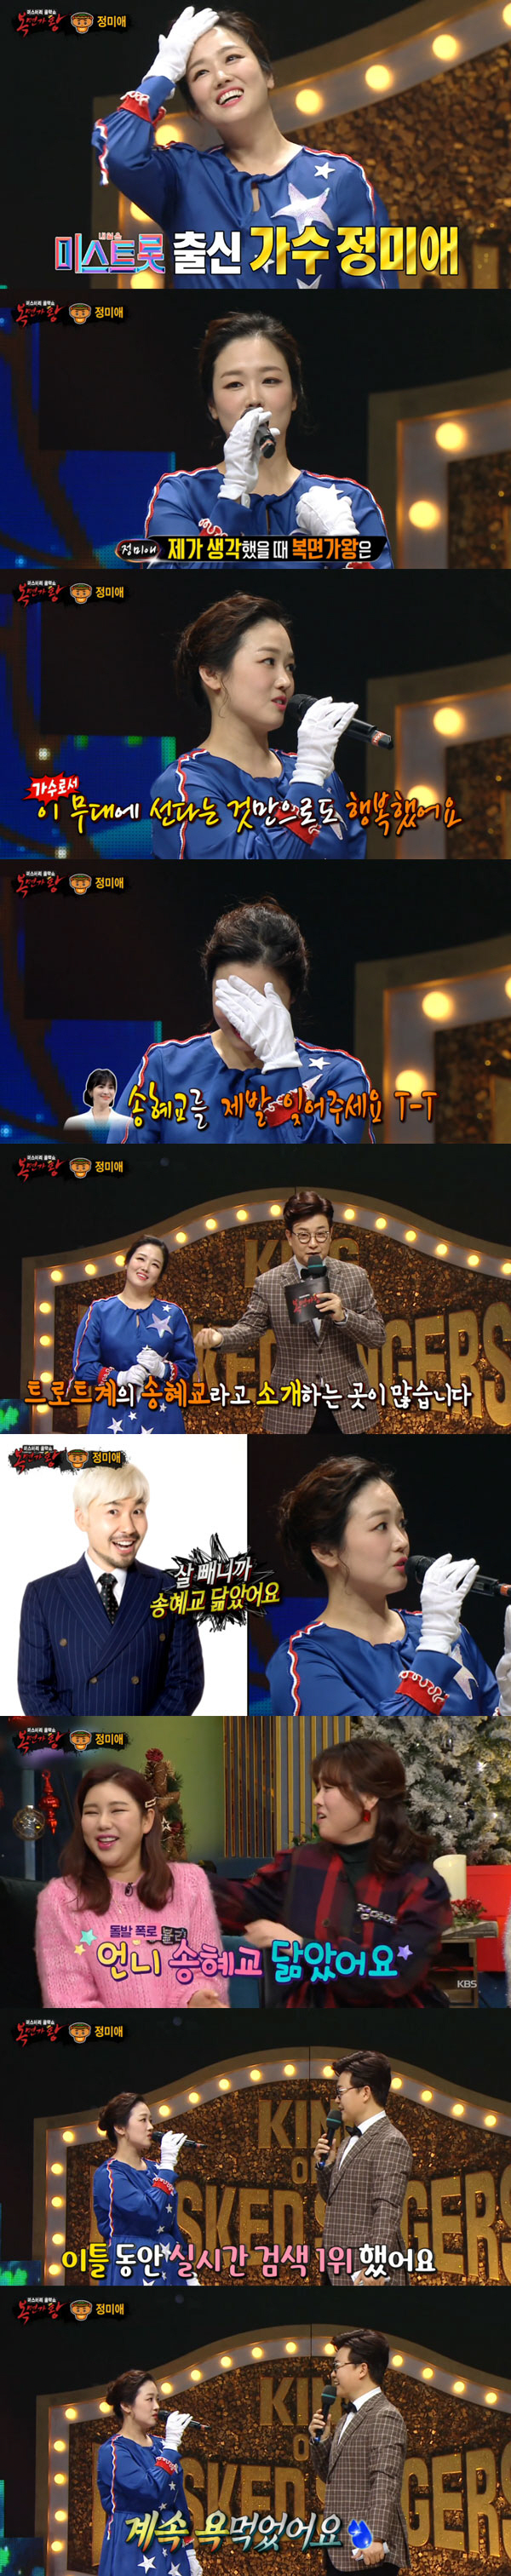 King of Mask Singer The Miami has been mentioned as Song Hye-kyo resemblance and then confessed to a special grievance.In MBC King of Mask Singer broadcast on the last two days, Top Model s 18th year old and four masked singers who were attacked to prevent it were staged.The audience rating soared to 11 percent when the identity of the American Airlines Hot Dog, which threatened the Kangangang 18-year-old, was revealed to be The Miami.The four-game winning streak, Nangrang 18, selected spider You Are My Everything and showed more stormy sensibility than the original song.Lee Seok-hoon, a former king who saw the stage of Nangrang 18, said, It is definitely the king of Gawang because of his ability to utilize experience and age.It feels like a long time ago, he said, expressing his respect for the 18-year-old .The American Airlines Hot Dog, which threatened the king Nangrang 18 with a loud singing voice like a highway, was trot singer The Miami.I thought King of Mask Singer was a great stage for singers to stand, and it was good to be here, said The Miami.Especially, The Miami laughed when he asked, Do you have a prejudice to wake up?He said, In the Diet program that appeared, Noh Hong-chul said, I look like Song Hye-kyo because I am not fat.I recently appeared on KBS4 Happy Together, and Song Gain was the number one real-time search for two days after mentioning Song Hye-kyo resembles, The Miami said.So I hope you forget it, he added, making him laugh.In addition, the identity of Tteokguk, which showed the essence of soft tone by selecting Park Won All of my life and Jung Seung Hwan Snowman, was Son Ho Young of the national group god.After taking off his mask, he completely digested the god hit medley alone.According to the production crew, when asked if there was a member who would recommend it to King of Mask Singer, I recommend Yoon Gye-sang.It would be a really good time if I came out once. Identity of Hyupjeong Station Exit 5, which captivated viewers with sexy dance, was Jae Yoon of Daeseol SF9. He appeared because he wanted to raise awareness in the group.The public knows a lot of Roone and Chanhee, and I wanted to let them know that the remaining seven members are too cool and shiny friends.  I want you to know Jae Yoon among them. Identity of Choi Bum-am, who defeated comedian Kim Young-chul in a profound voice and advanced to the second round, was an actor from the voice actor.I am a serious hit, and I am really grateful for seeing it as a year-round, it was a really good time, he said.Asked by MC if he had any other goals as an actor, he said, My most respected teacher is Lee Soon-jae. But he is a teacher who admires him.It is my goal to do long runs like them. He expressed his aspirations as an actor. His audiences reaction was also hot, including the first real-time search for his appearance.On the other hand, the stage of eight new masked singers who are going to top Model at the age of King of Mask Singer, which has won four consecutive wins with the long-term king Smel, can be seen at 6:20 pm on Sunday this week.